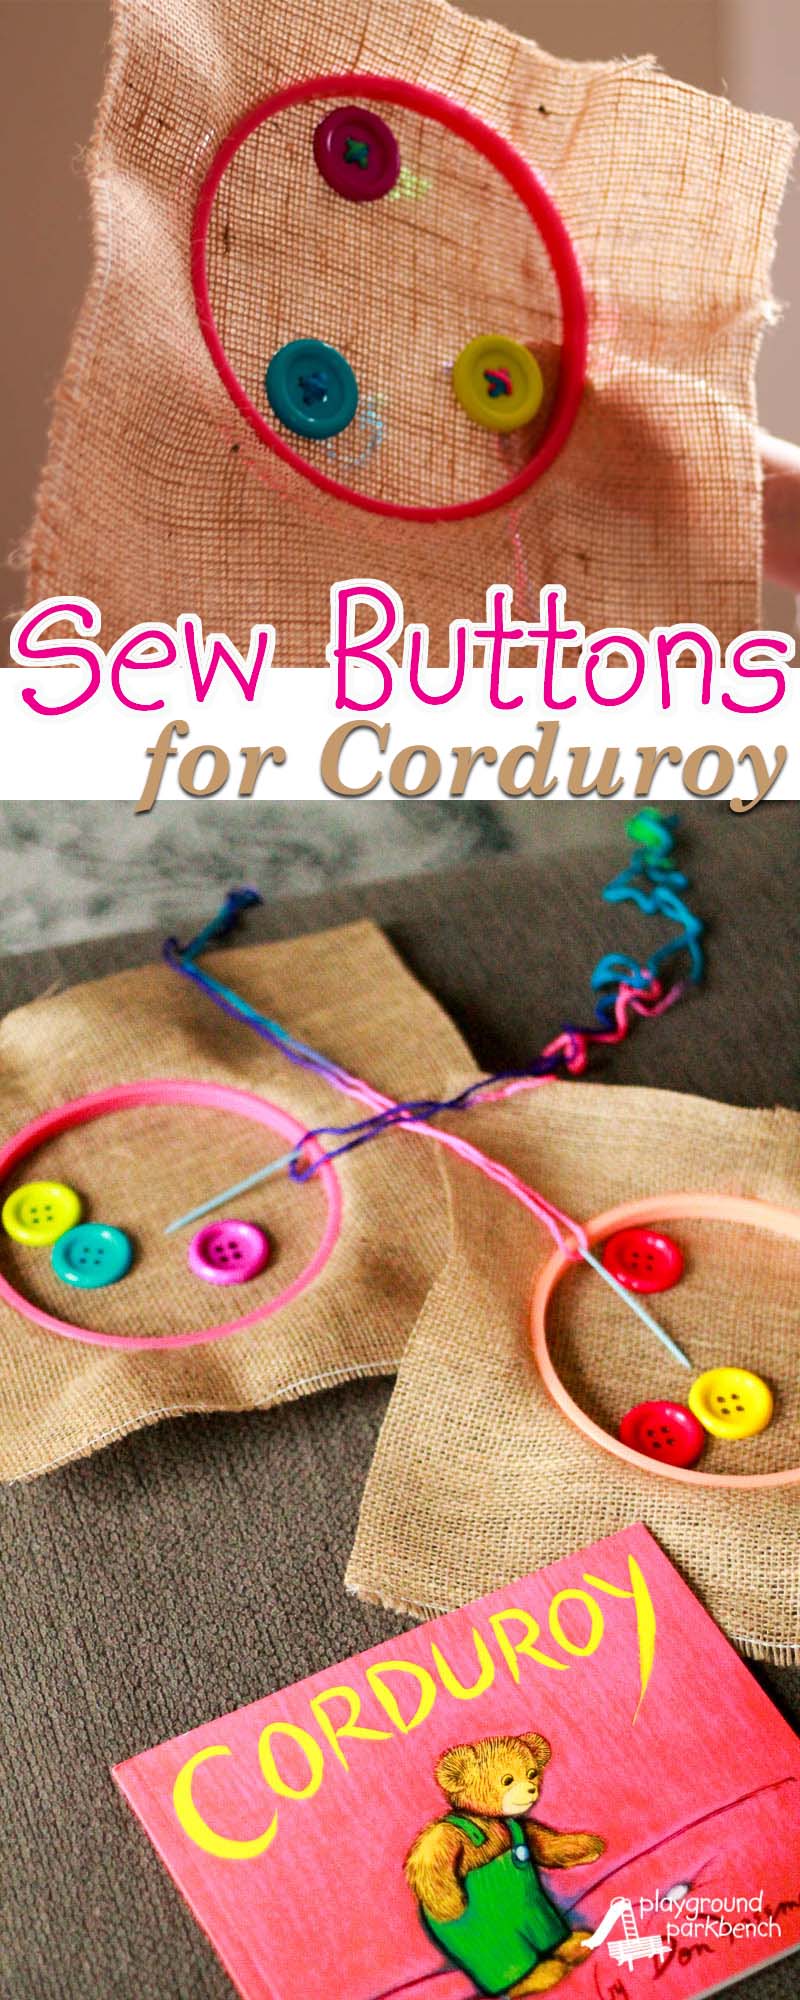 Corduroy is among nearly ever children's literature collections. A favorite for nearly 50 years, it tells the story of one little bear's quest for a friend, despite missing his button. It inspired this fine motor skill challenge for my toddler and preschooler, as they learned to sew buttons on burlap, this month's busy box activity for quiet independent play. | Fine Motor Skills | Preschool | Toddler | Children's Books | Quiet Time | Kids Activities | Learning Activities |